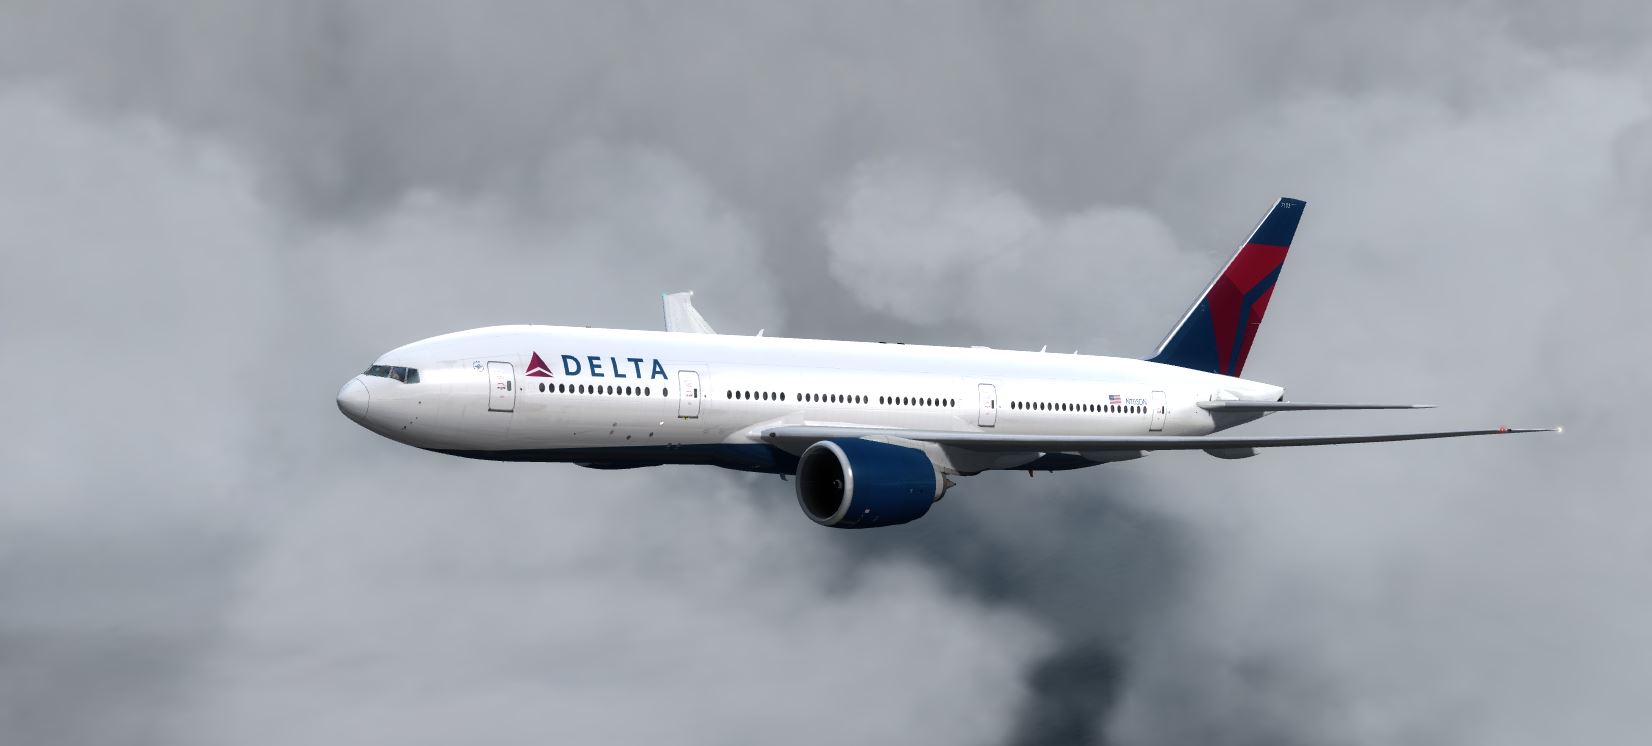 B777-200 Delta Airlines Standard Livery-5870 